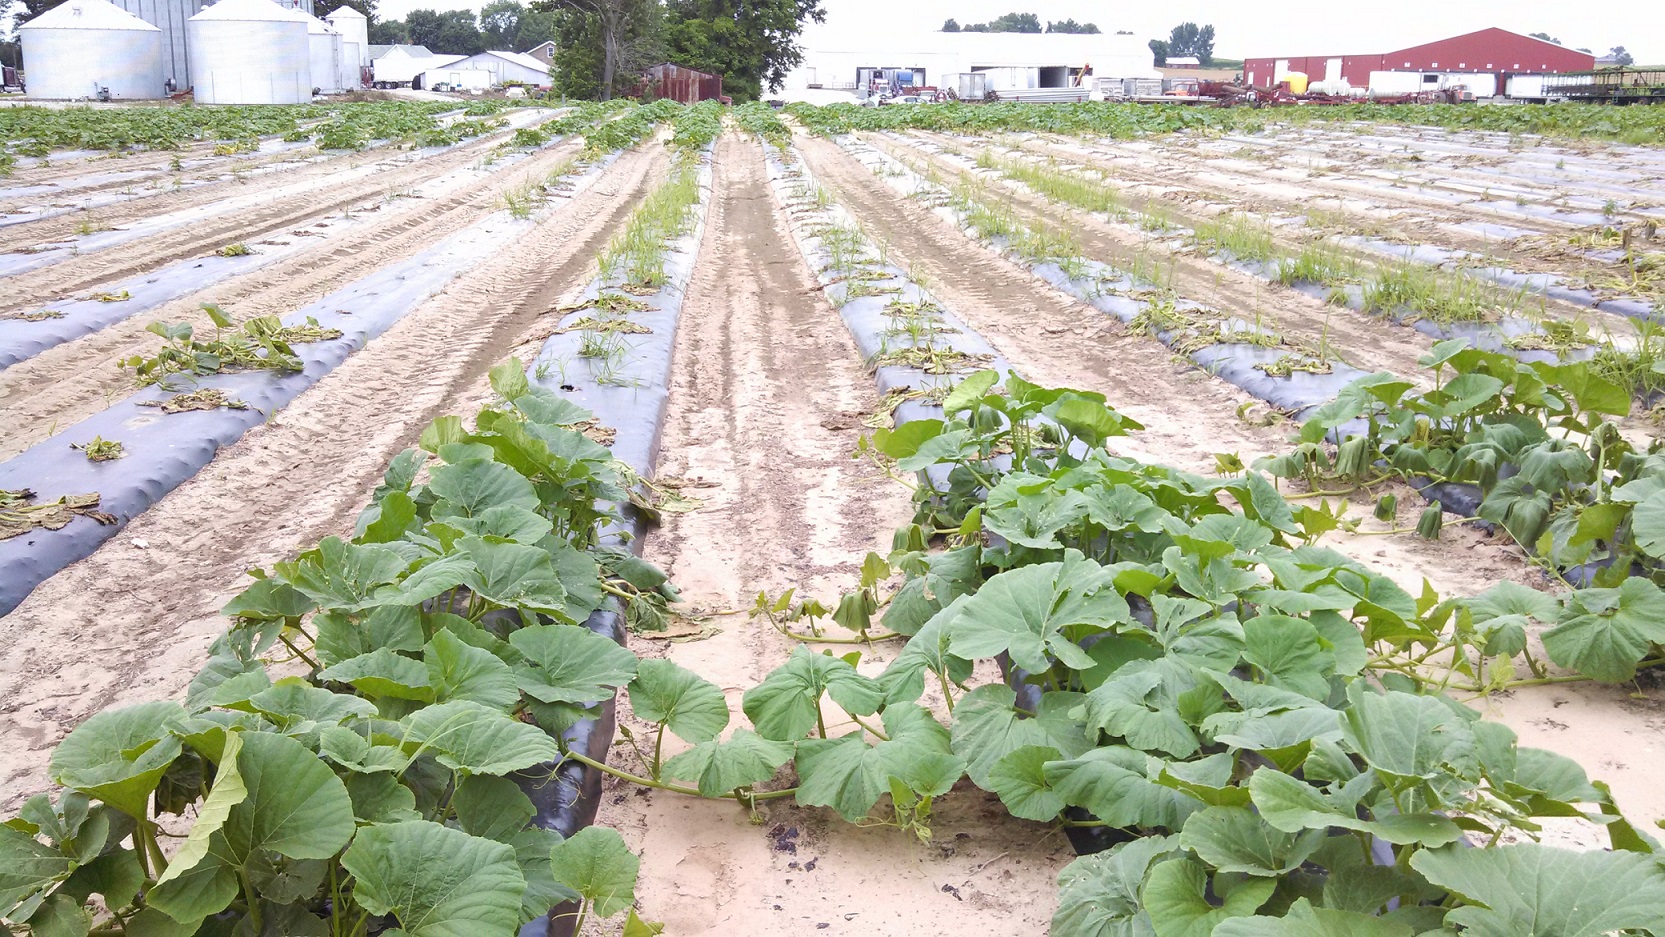 Phytophthora blight has affected the pumpkin plants in the lower area of this field.  Note the wilted and dead plants in the low area shown here.  